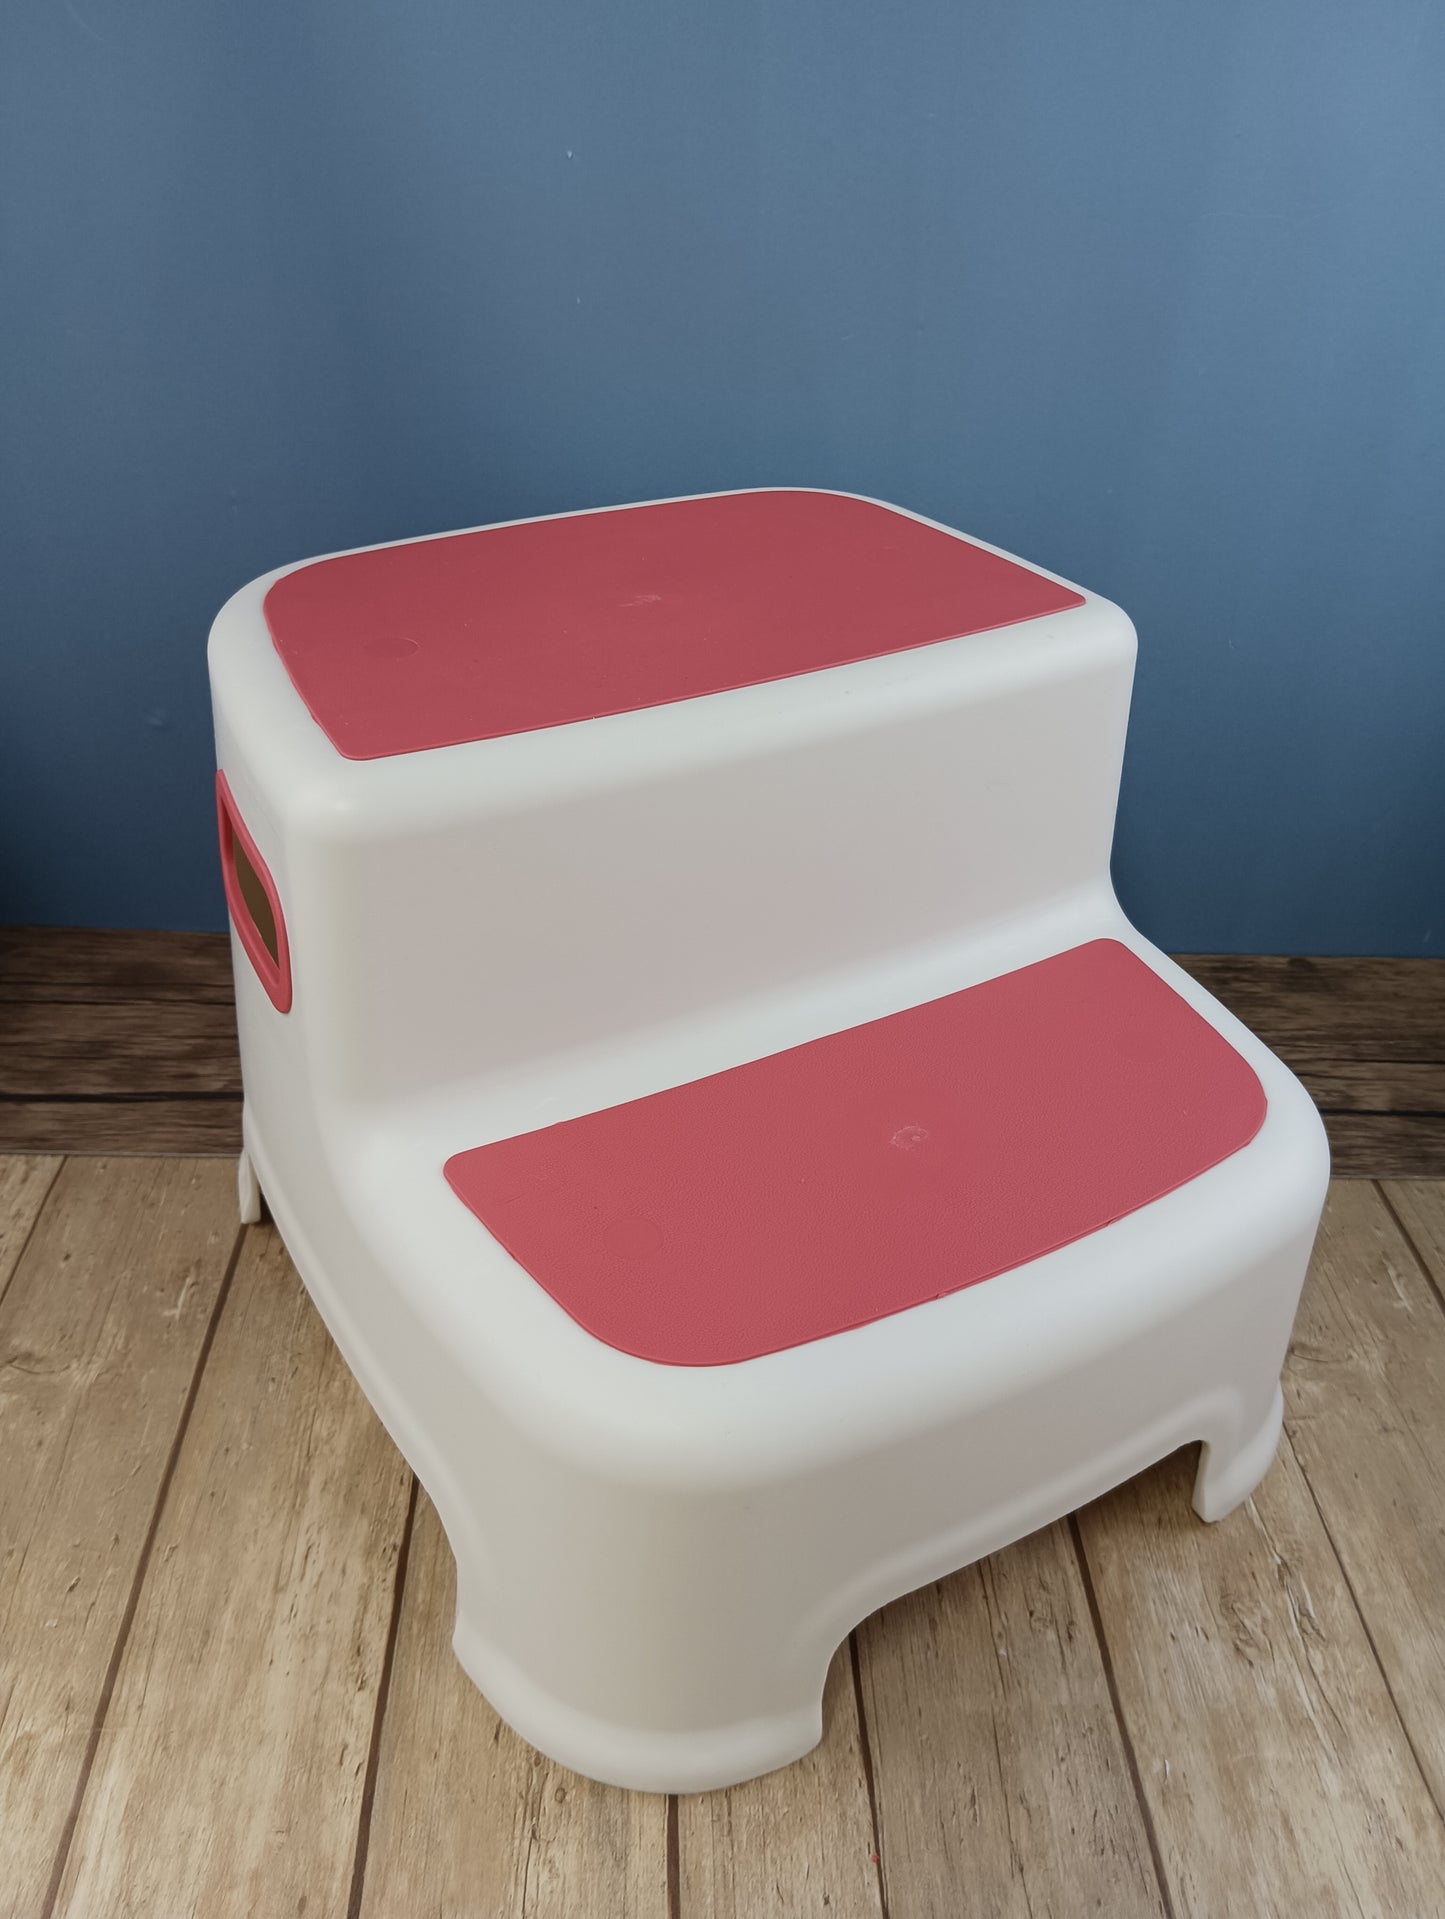 AKIMRABY Children's footstool, baby toilet stool, stepping stool, chair, small bench, hand washing step, child footstool, standing stool